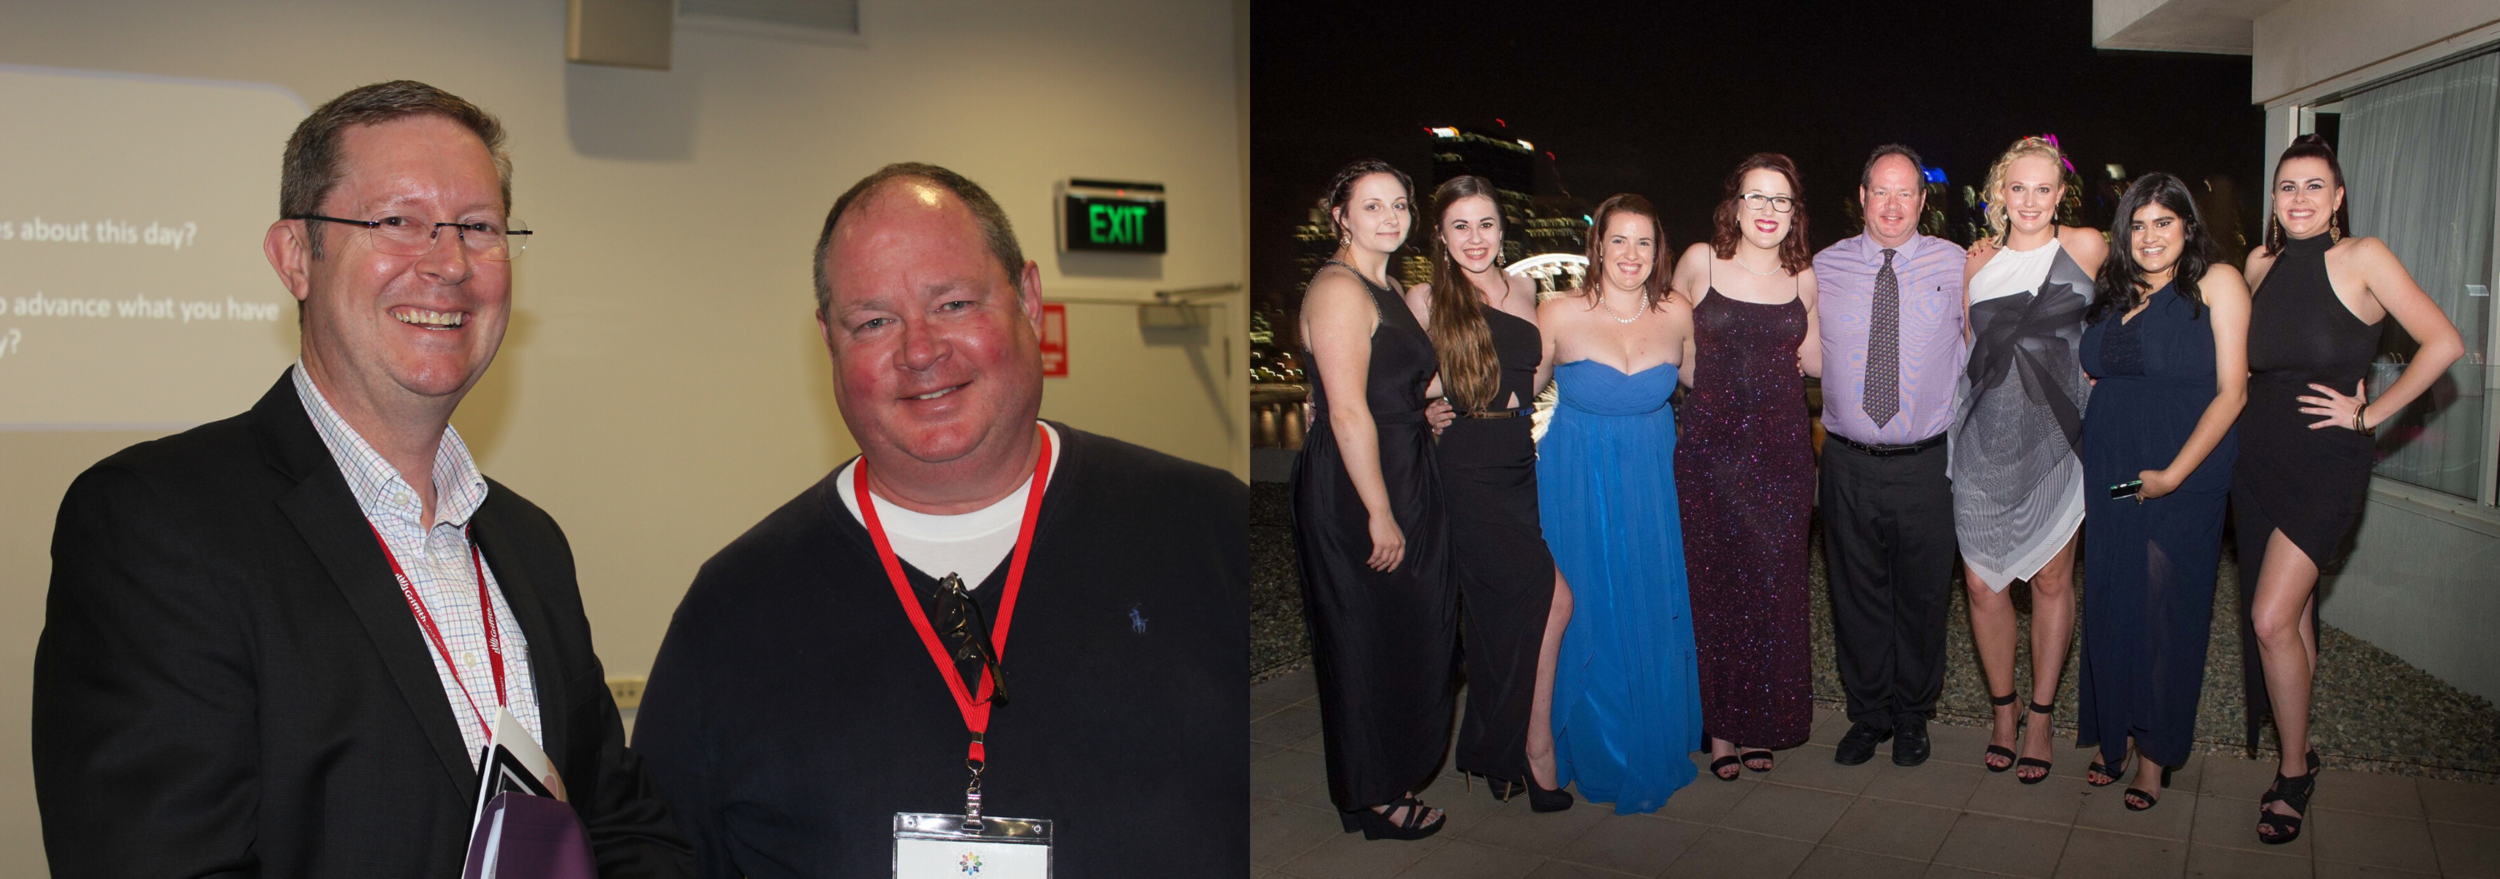 Hennessey with Bob Gee (Director-General Dept. of Youth Justice) at the 5th Annual Queensland Youth Justice Forum in 2019 and Hennessey with the 2015 Criminology Student Society (CSS) Ball with the outgoing Executive Committee